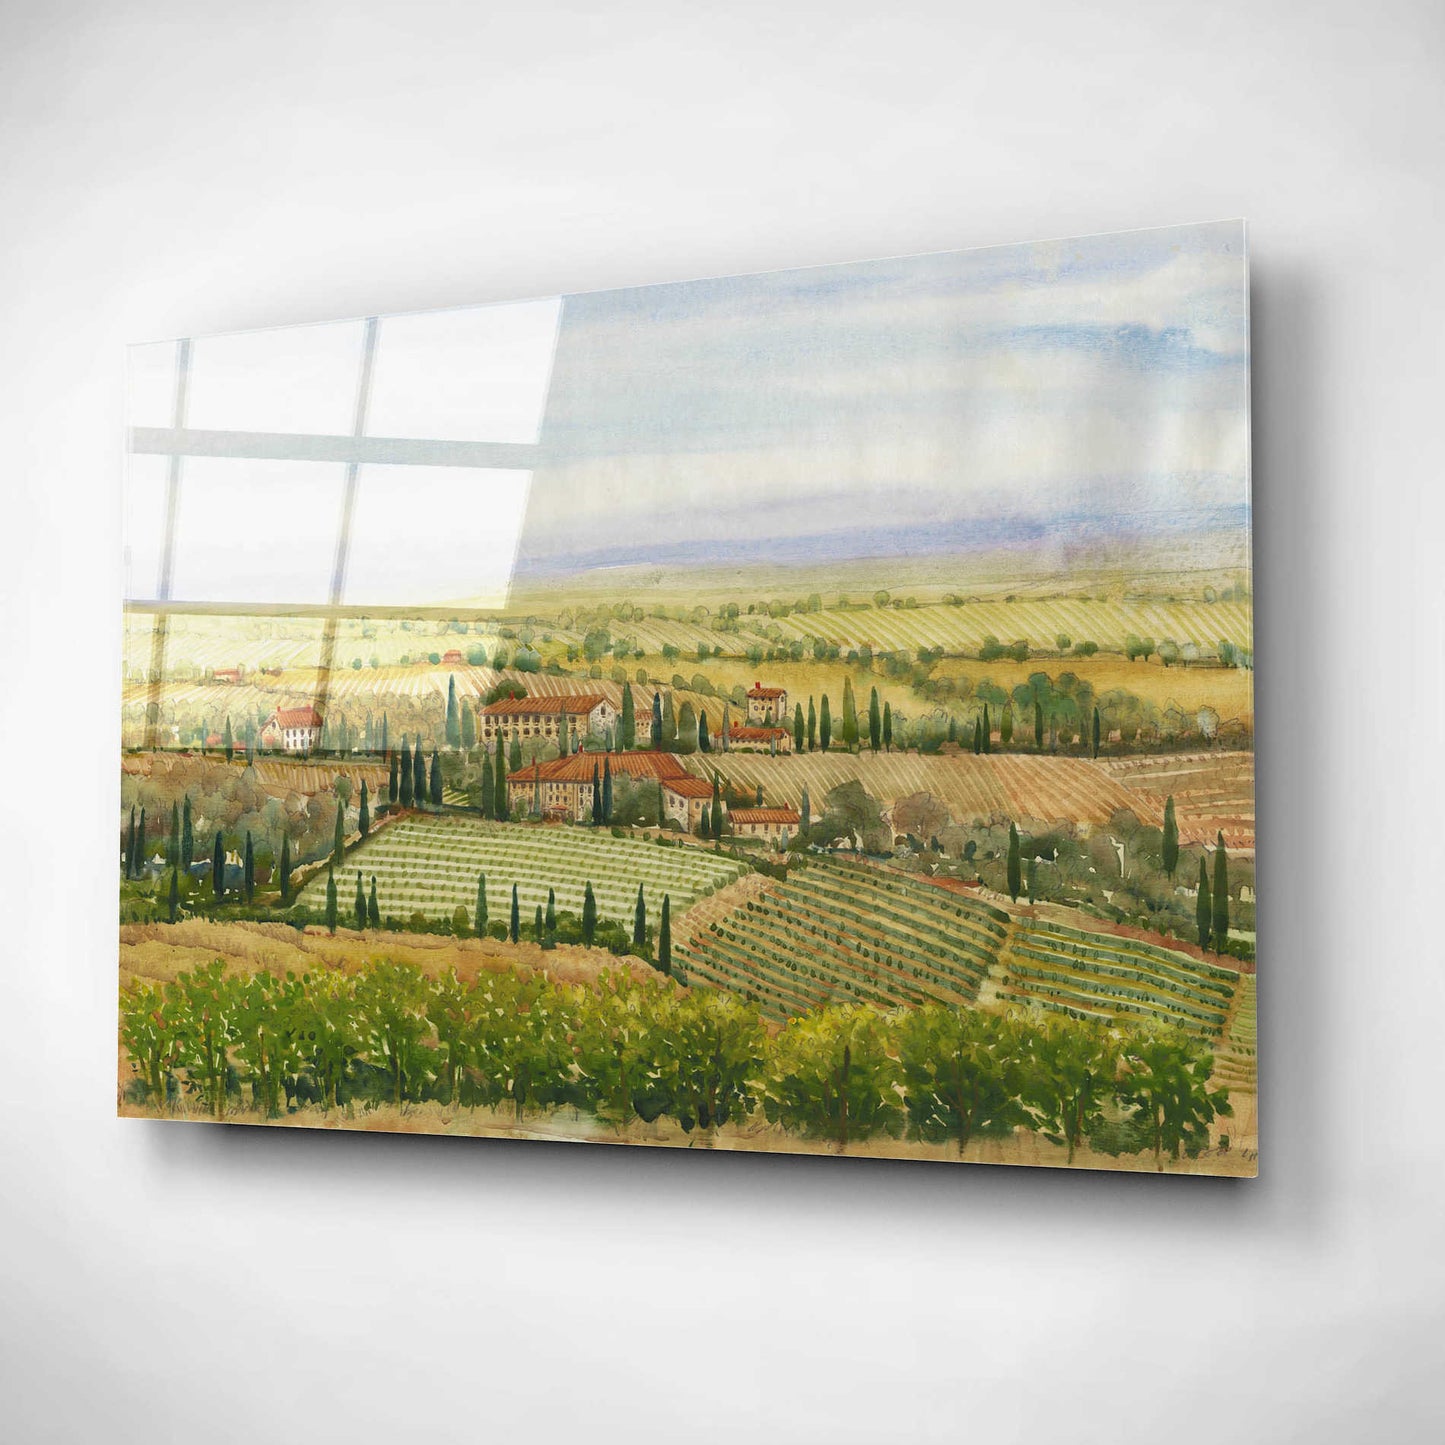 Epic Art 'Wine Country View II' by Tim O'Toole, Acrylic Glass Wall Art,24x16